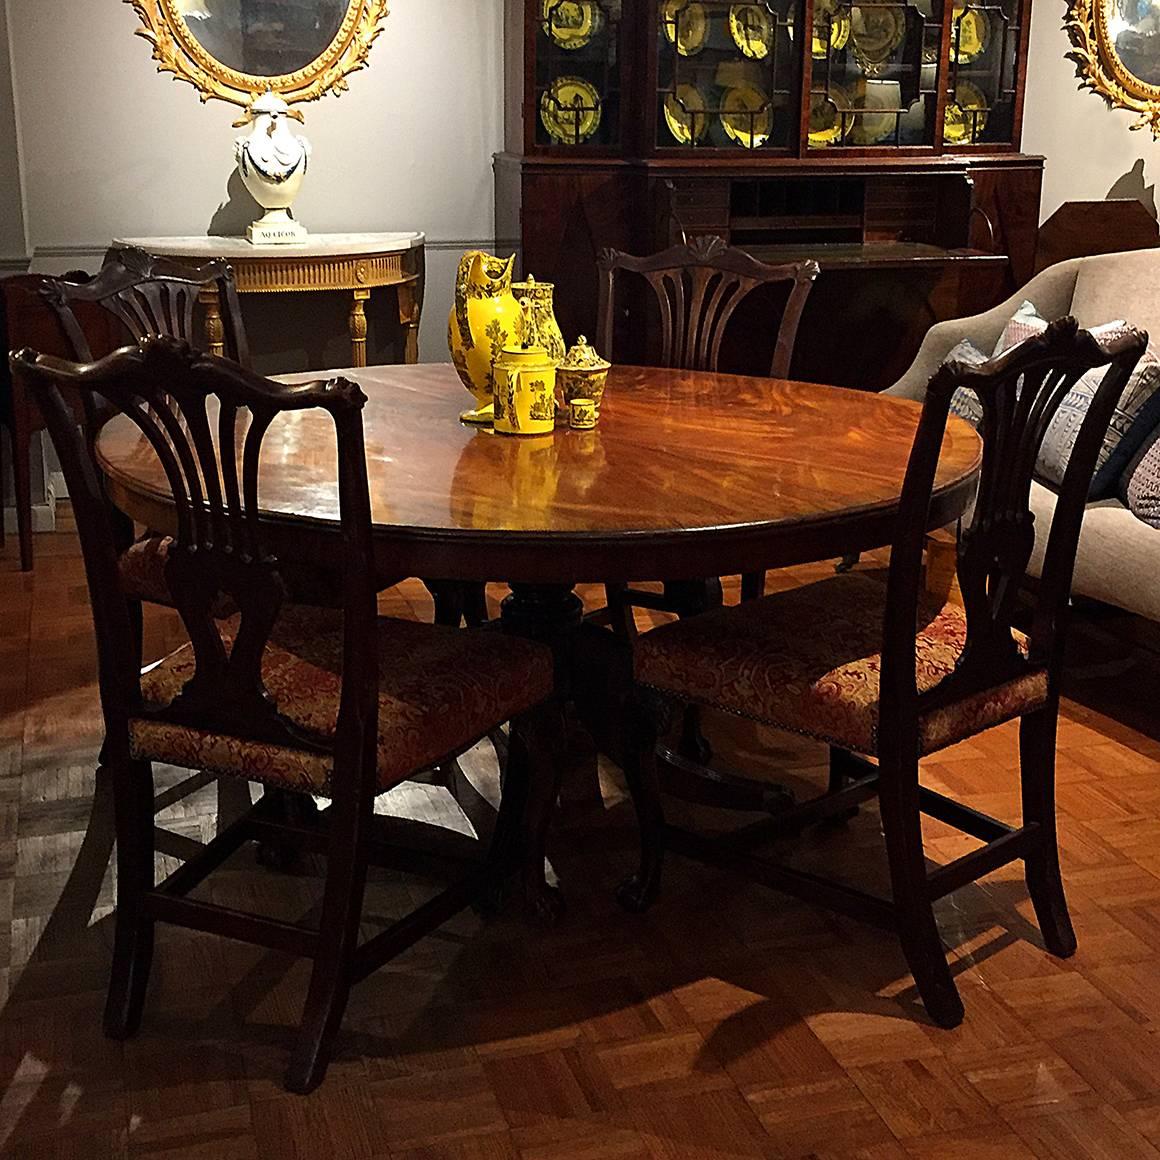 Circular Regency Mahogany Pedestal Dining Table In Excellent Condition For Sale In Long Island City, NY